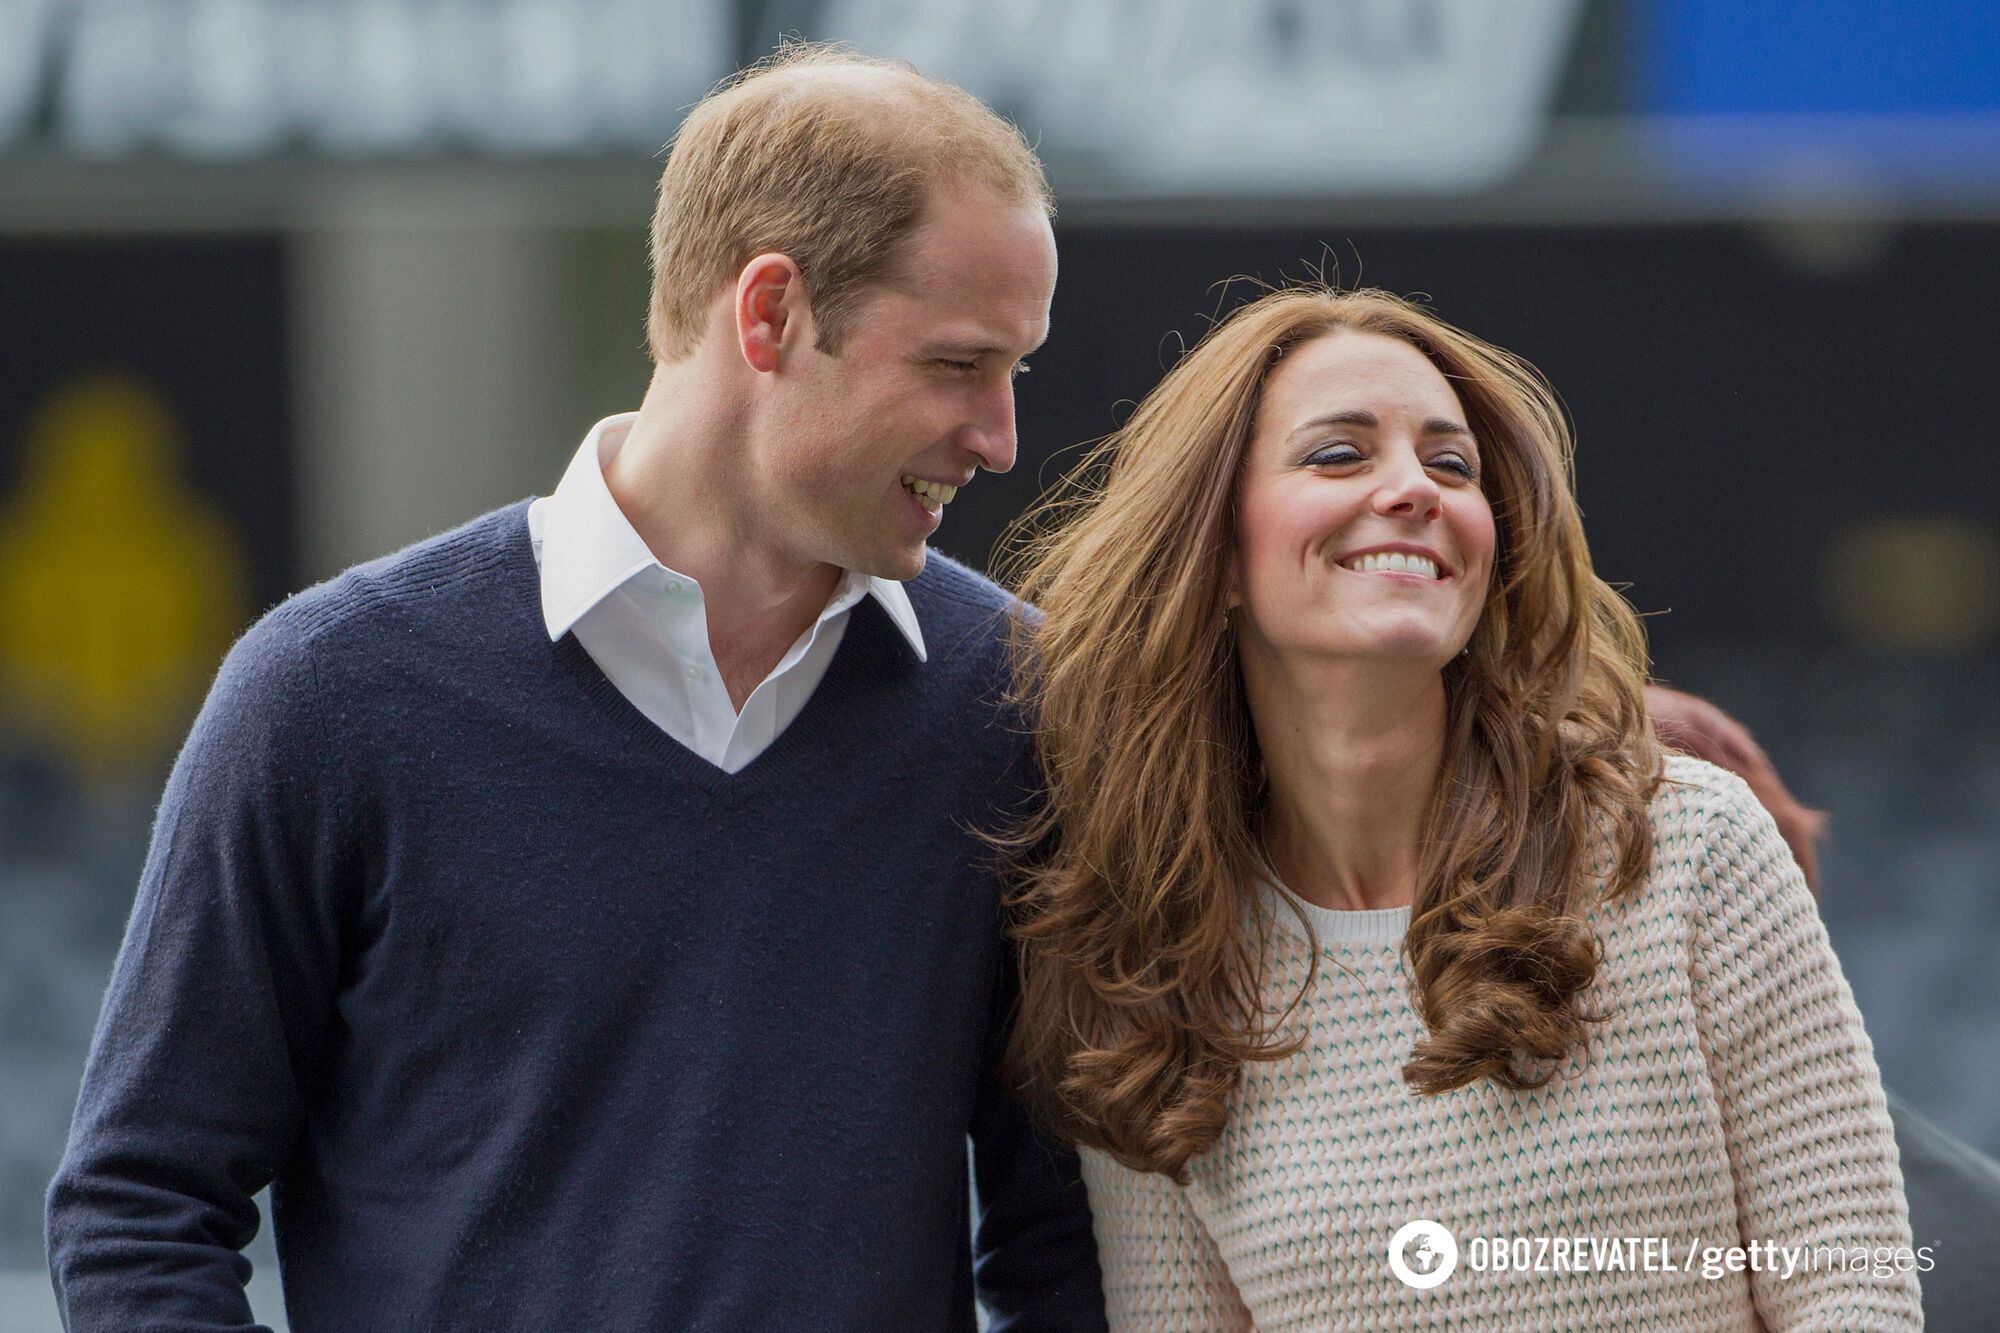 It became known why Prince William did not appear in Kate Middleton's touching video when she told the world about cancer